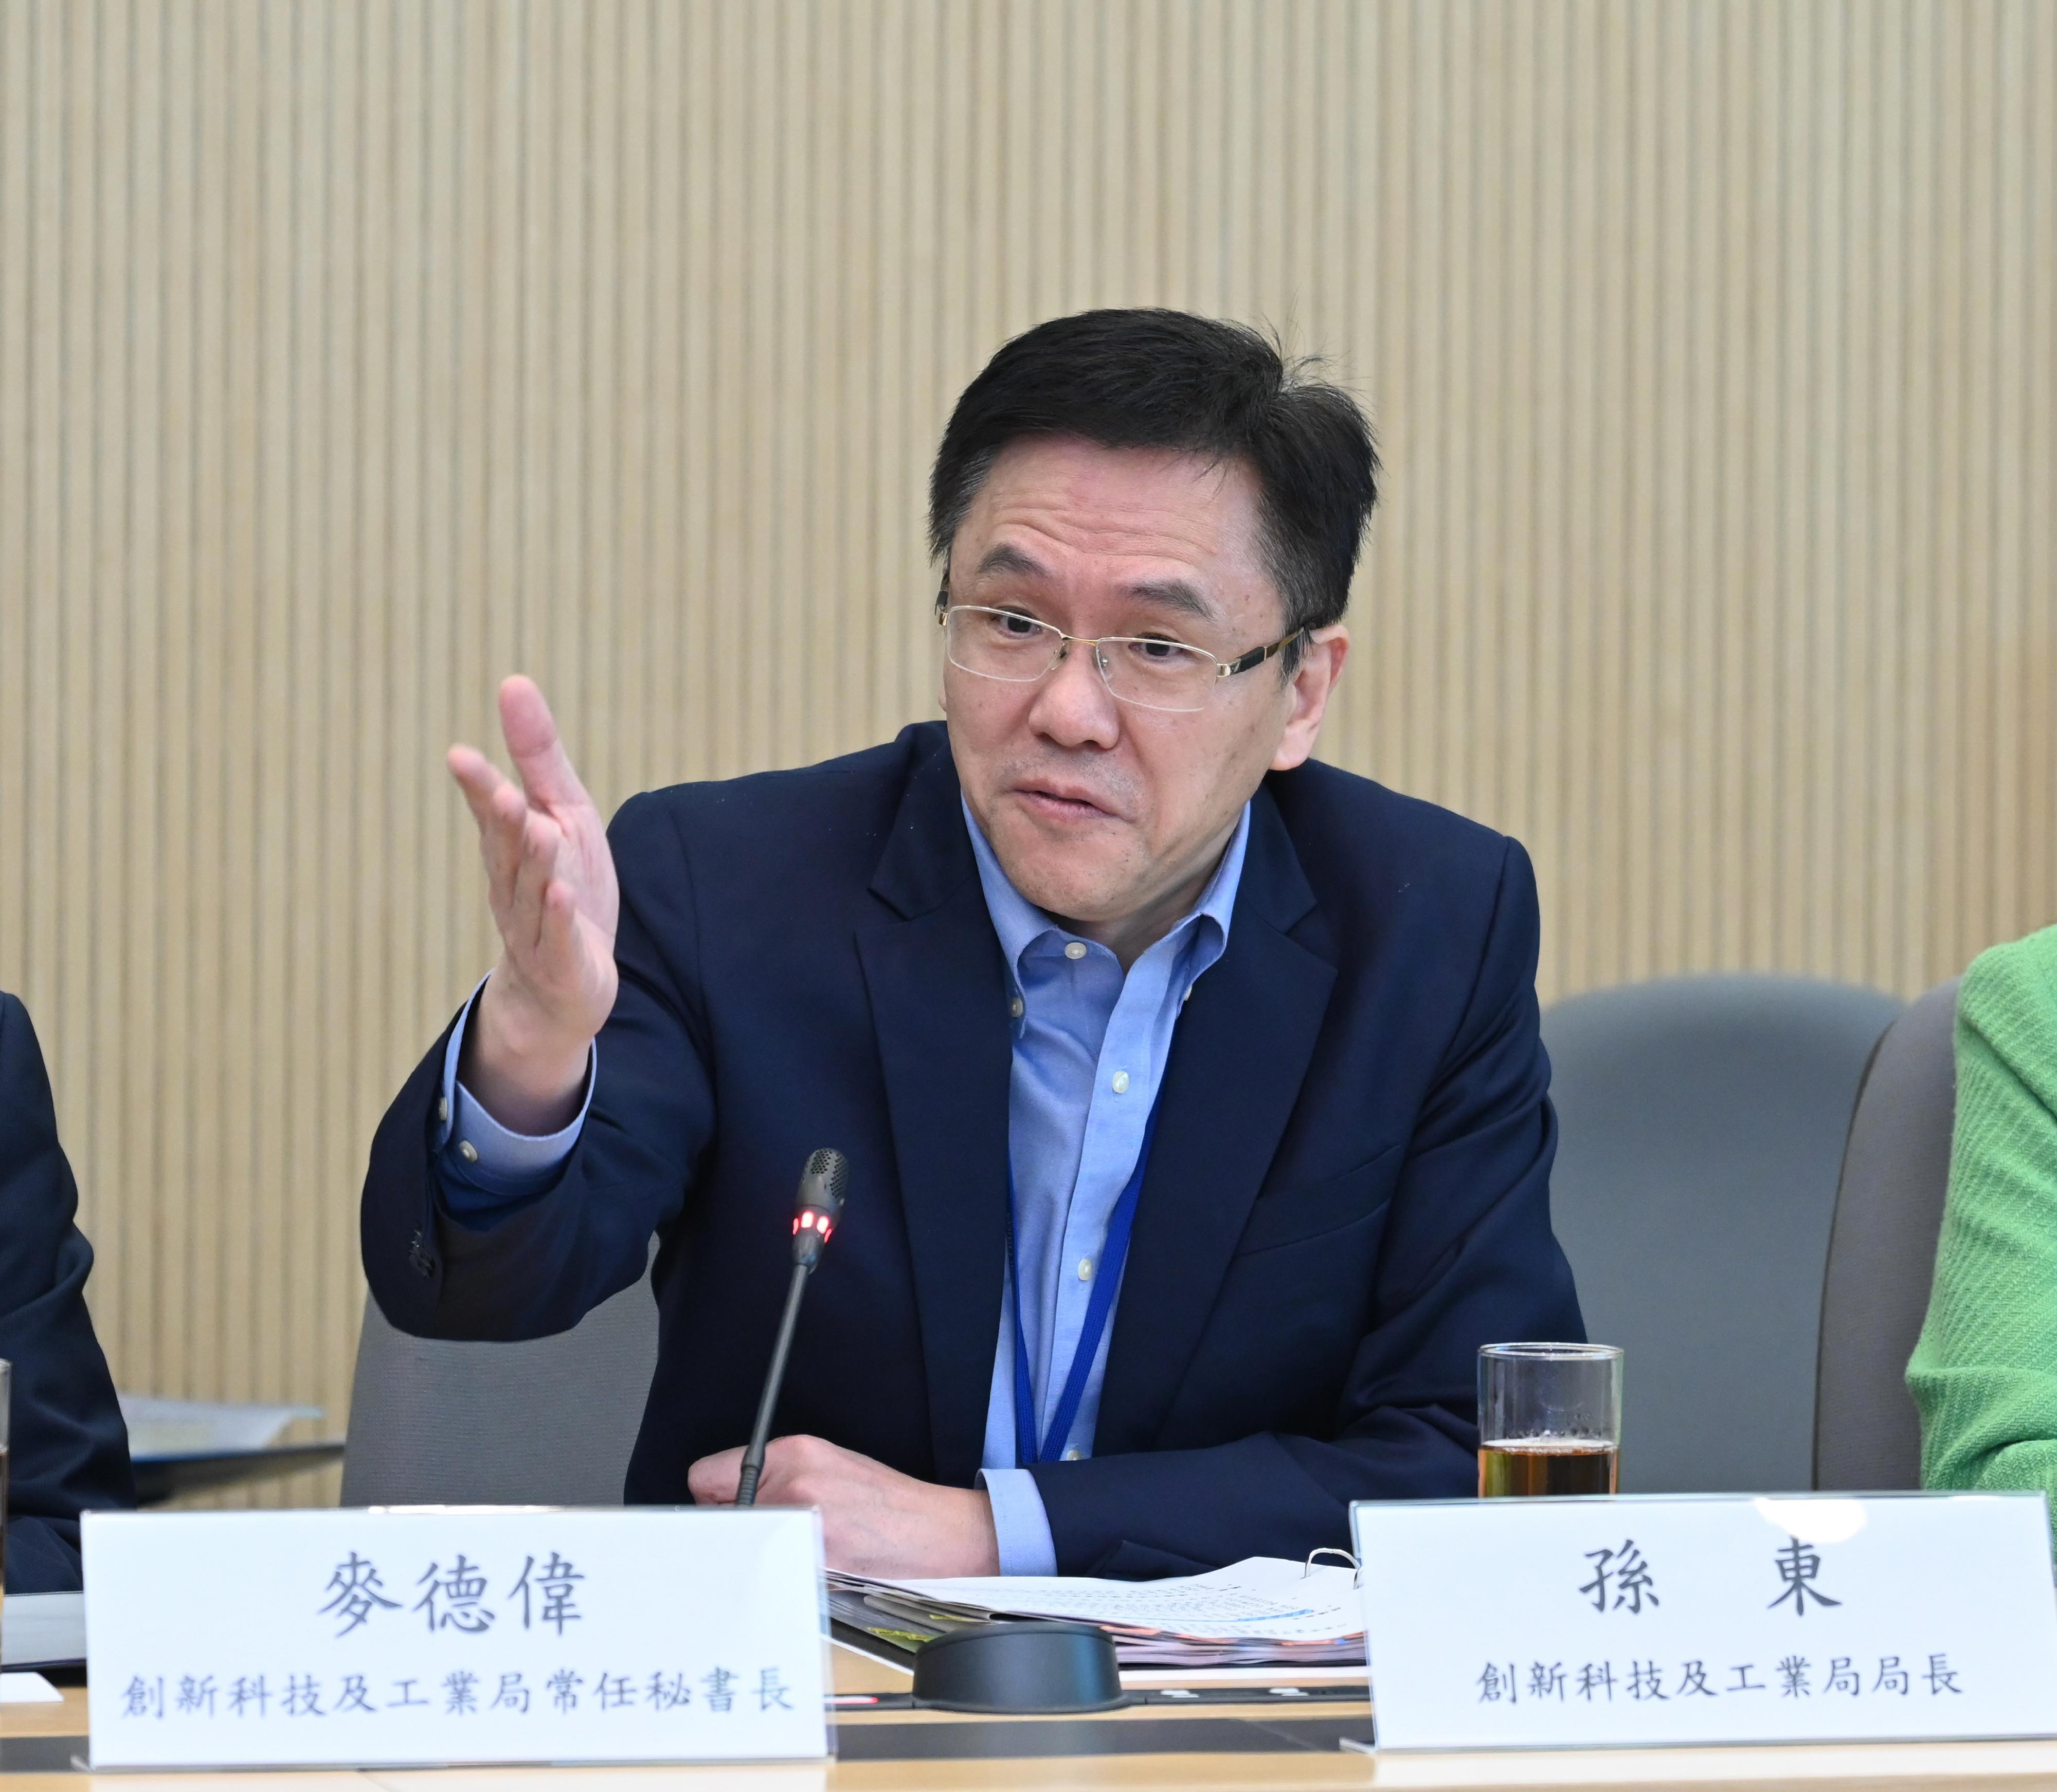 The Secretary for Innovation, Technology and Industry, Professor Sun Dong, chaired the 10th meeting of the Joint Task Force on the Development of the Hong Kong-Shenzhen Innovation and Technology Park in the Loop in Hong Kong today (September 7).